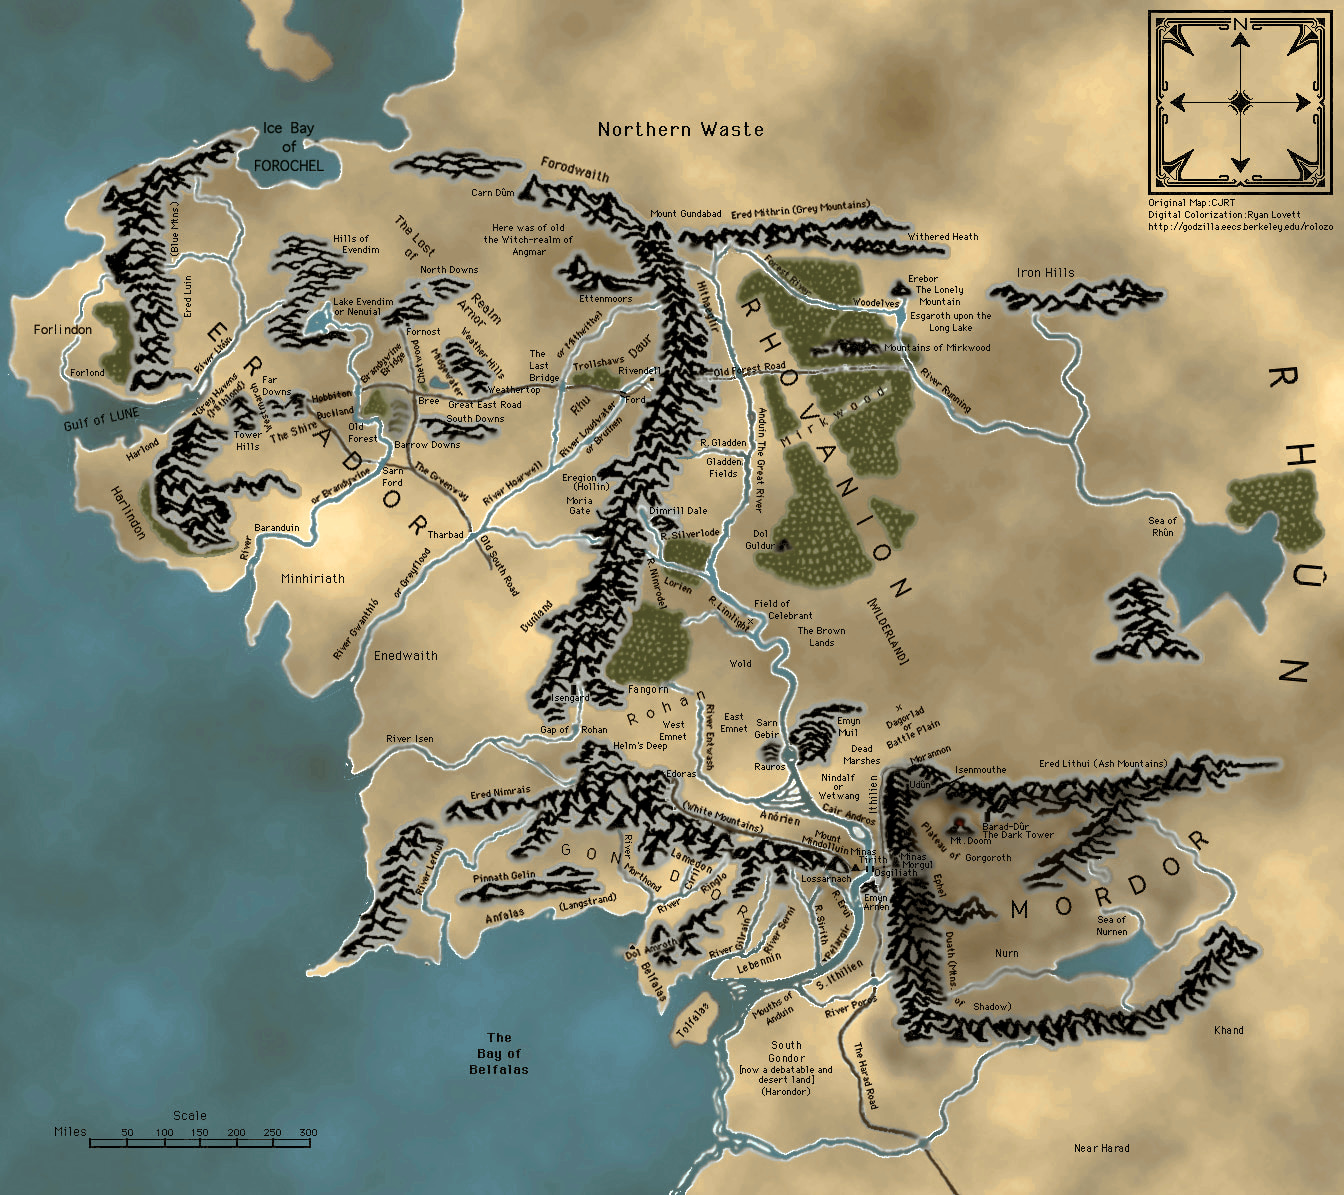 Map of Middle-earth